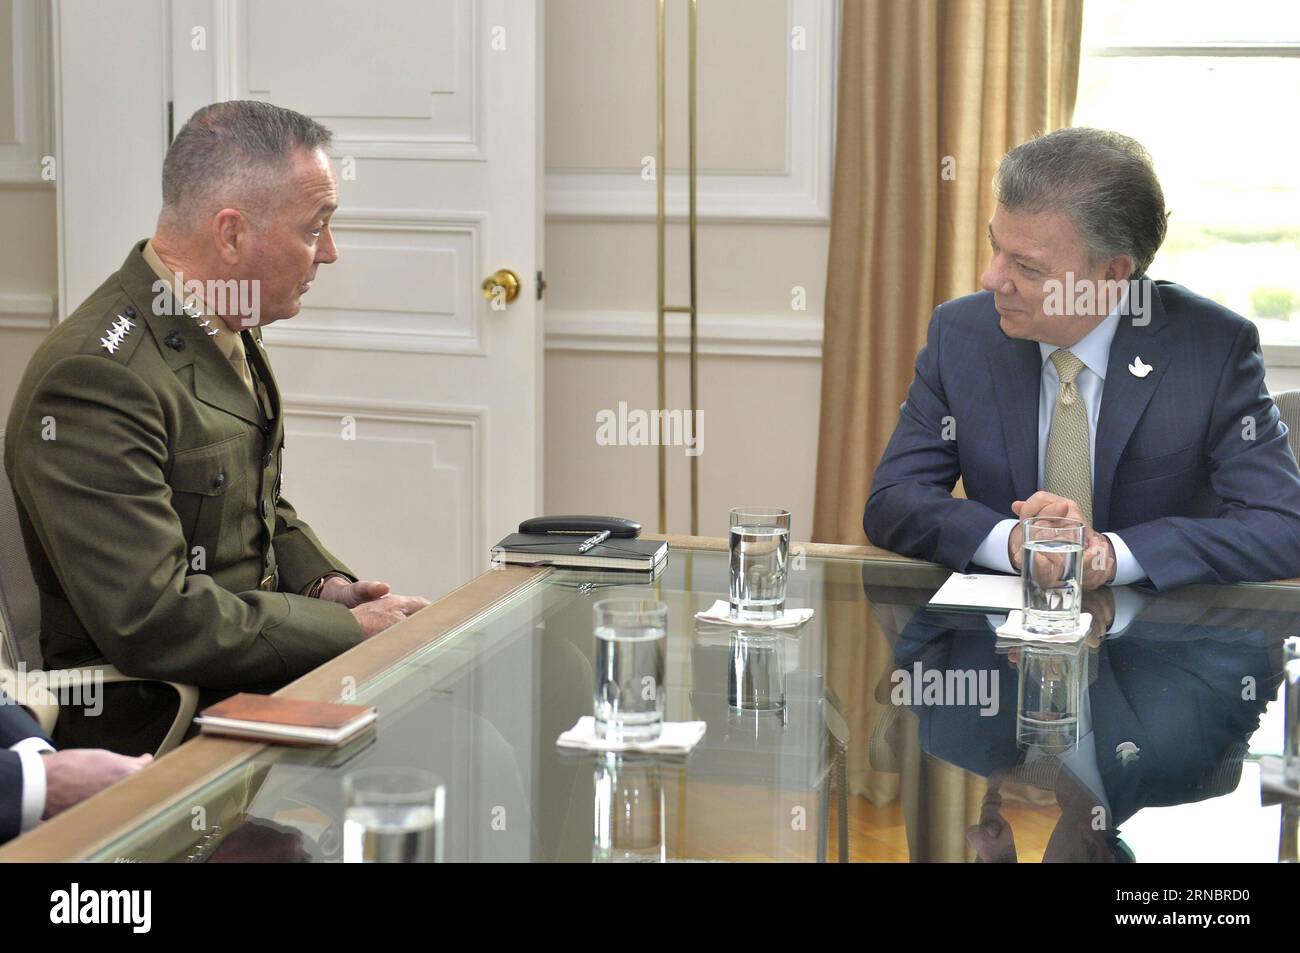 (160310) -- BOGOTA, March 10, 2016 -- Image provided by Colombia s Presidency shows Colombian President Juan Manuel Santos (R) talking with the United States Chairman of the Joint Chiefs of Staff General Joseph F. Dunford, in Bogota, Colombia, on March 10, 2016. Juan David Tena/Colombia s Presidency) (jg) (ah) COLOMBIA-BOGOTA-US-POLITICS-SANTOS ColombianxPresidency PUBLICATIONxNOTxINxCHN   160310 Bogota March 10 2016 Image provided by Colombia S Presidency Shows Colombian President Juan Manuel Santos r Talking With The United States Chairman of The Joint CHIEFS of Staff General Joseph F Dunfor Stock Photo